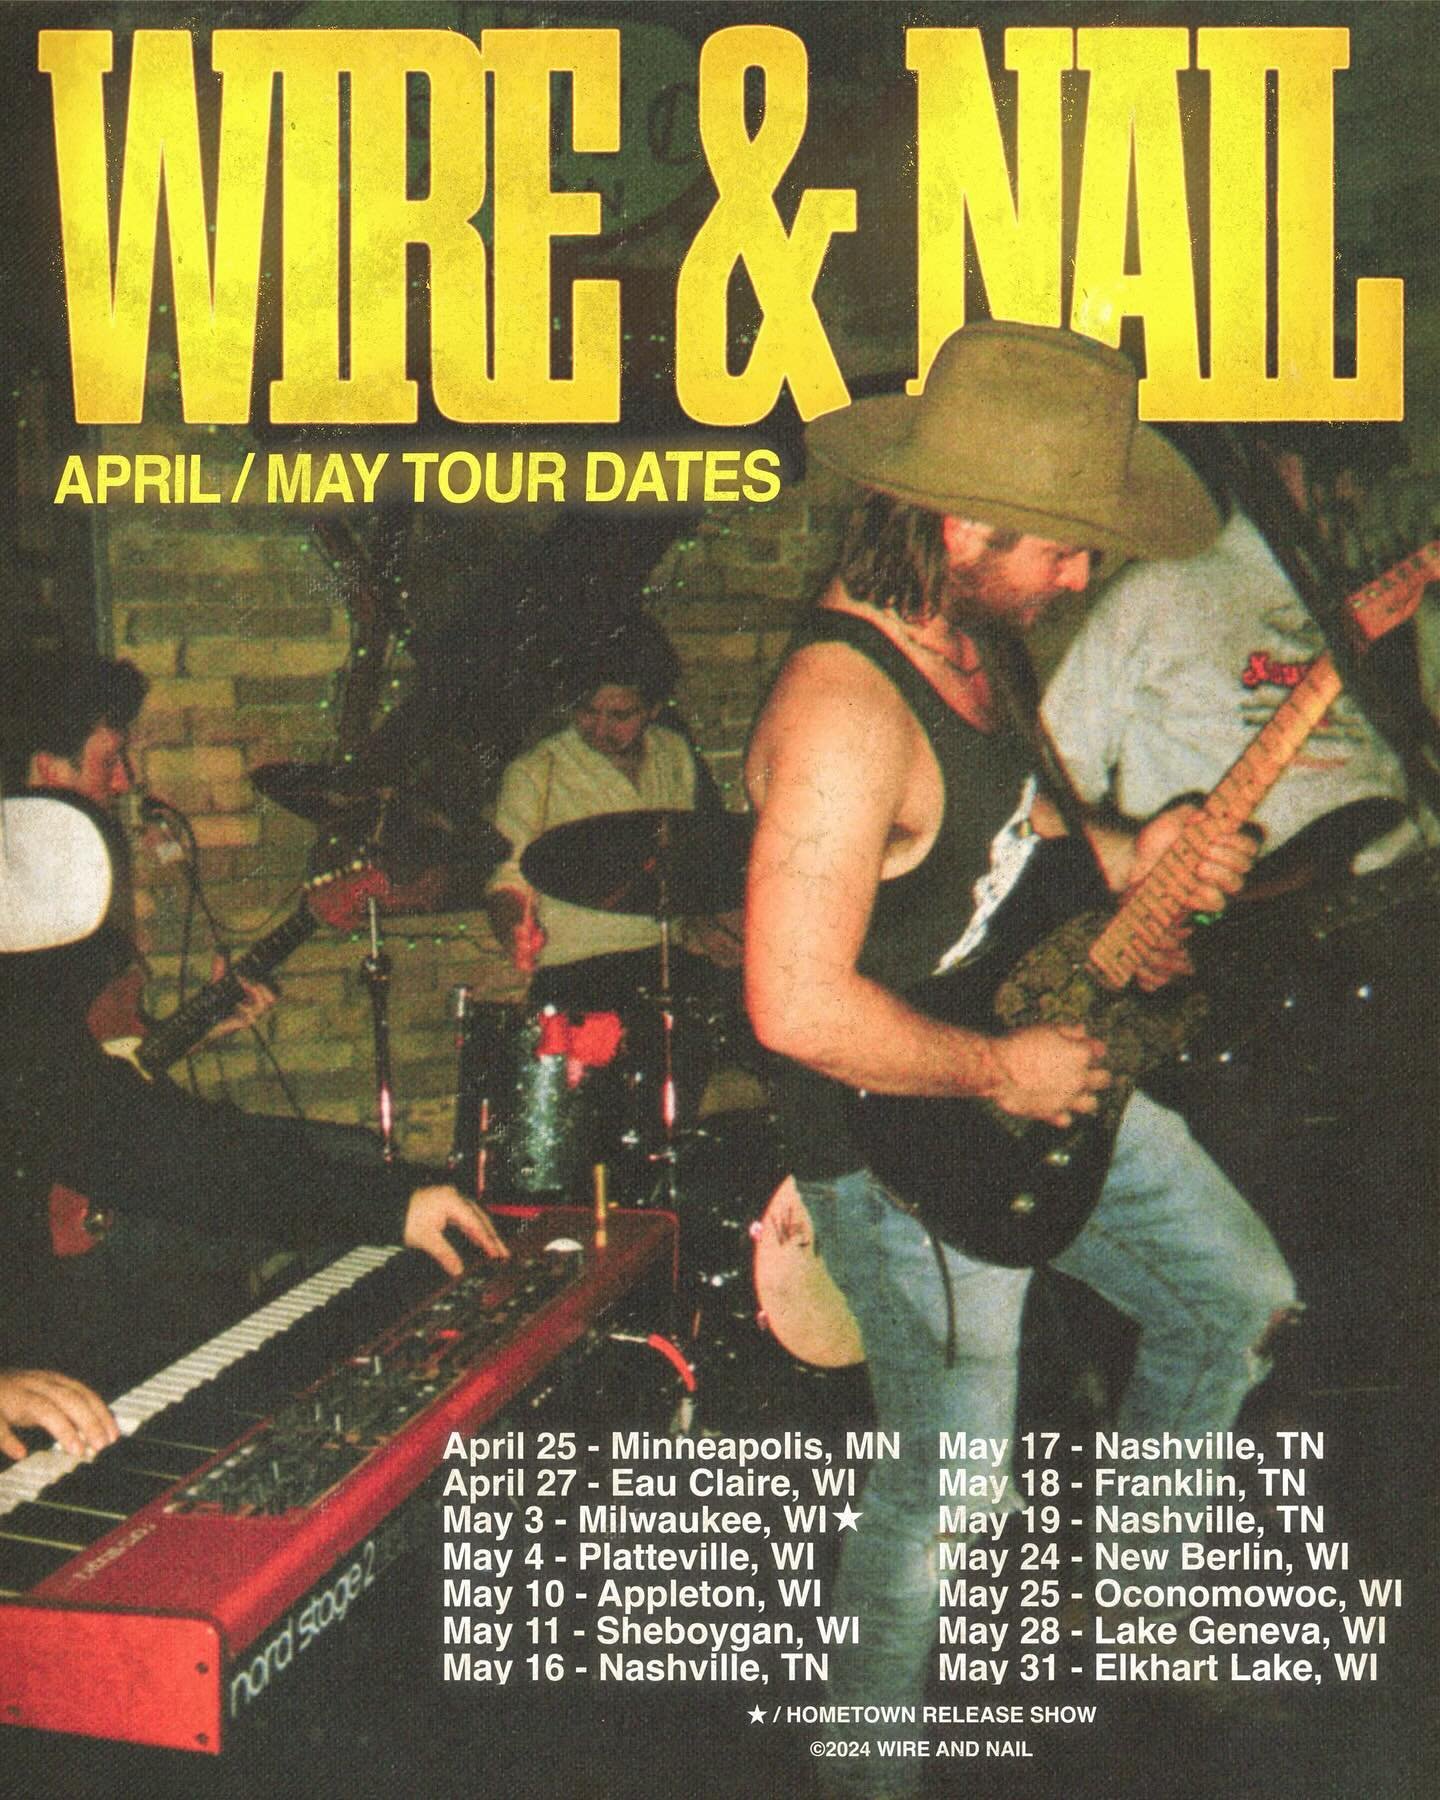 ⚡️⚡️APRIL &amp; MAY TOUR DATES ⚡️⚡️

check out our website for more details 

WWW.WIREANDNAILBAND.COM - in bio. 

🐊